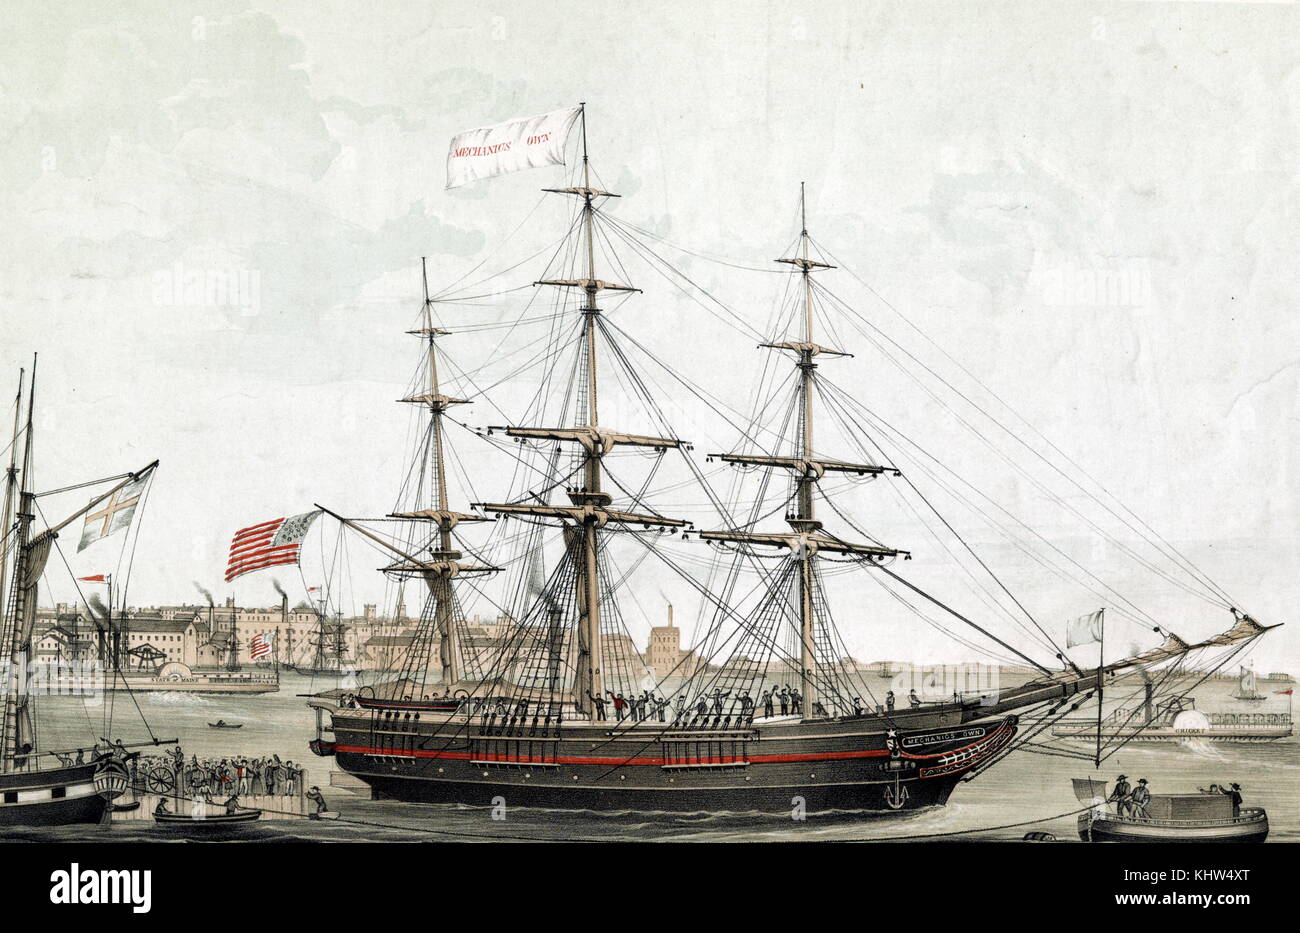 Colour print depicting the ship 'Mechanics' Own', built for the mechanics' mining association. Dated 19th Century Stock Photo